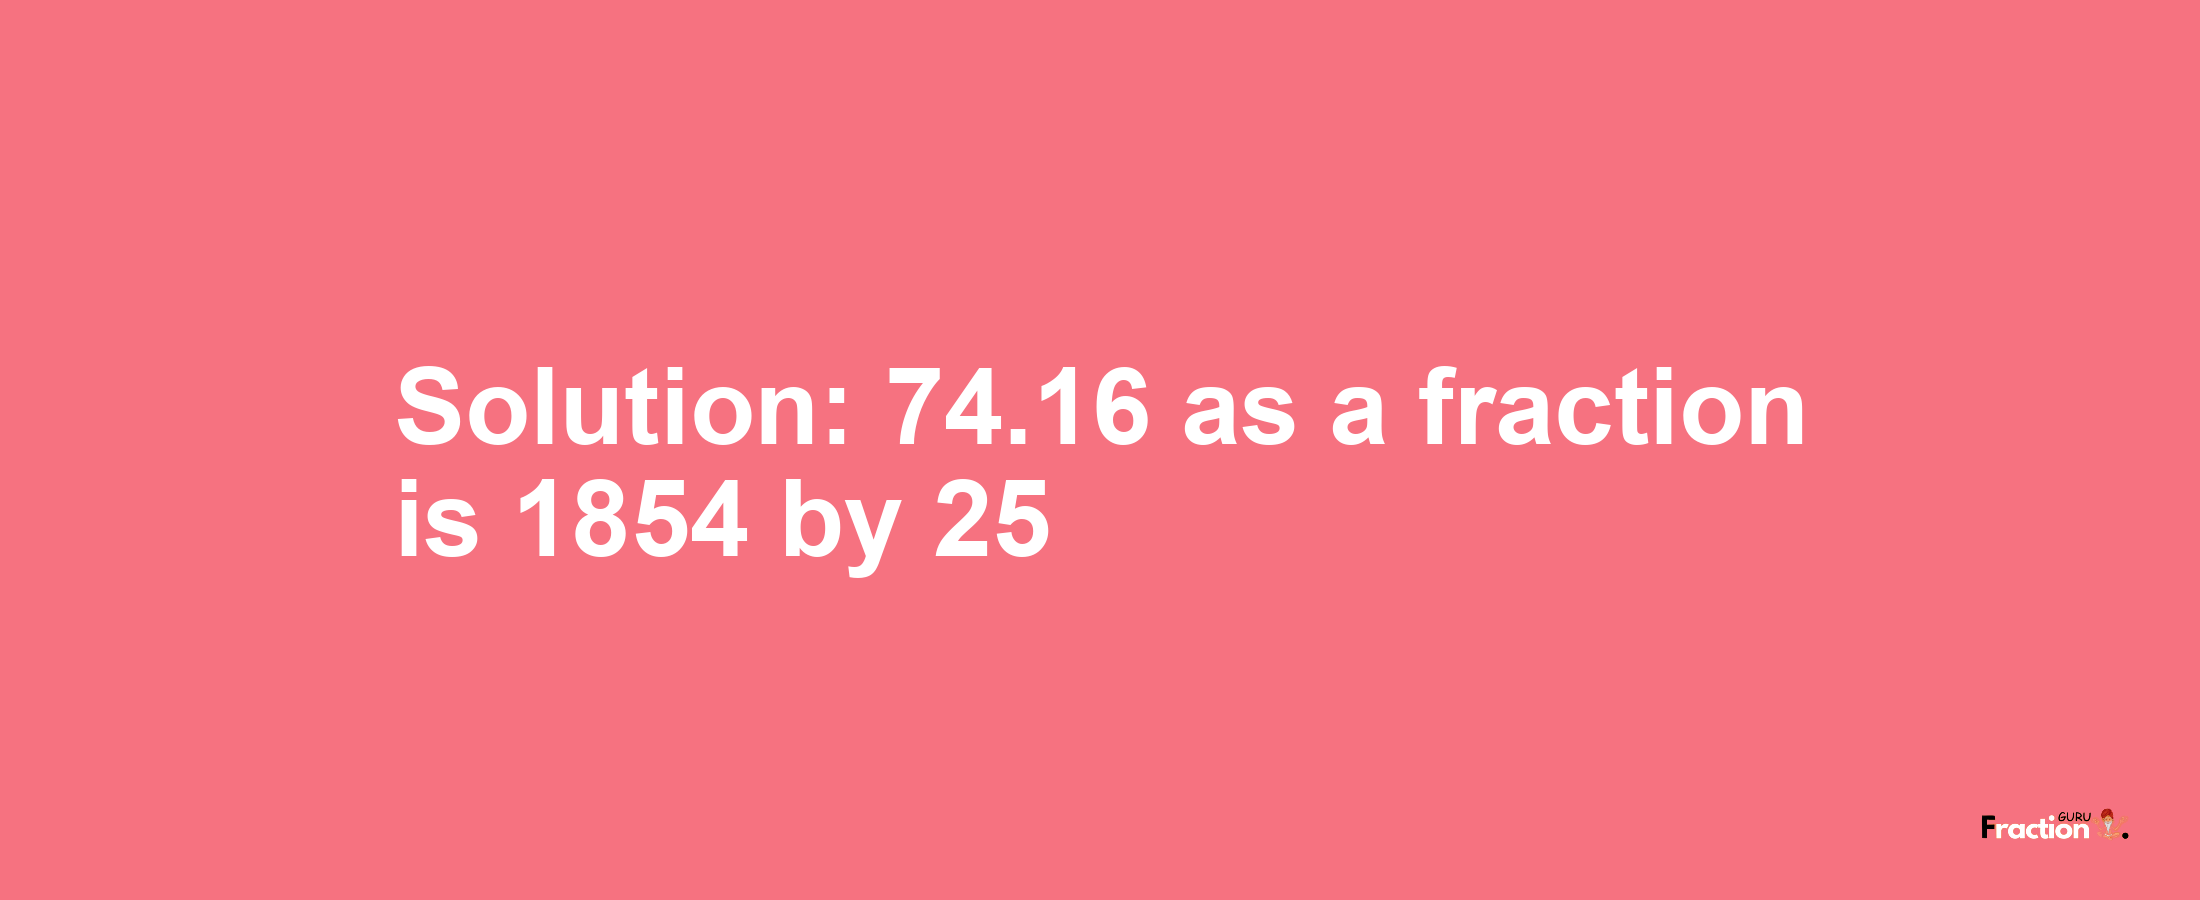 Solution:74.16 as a fraction is 1854/25